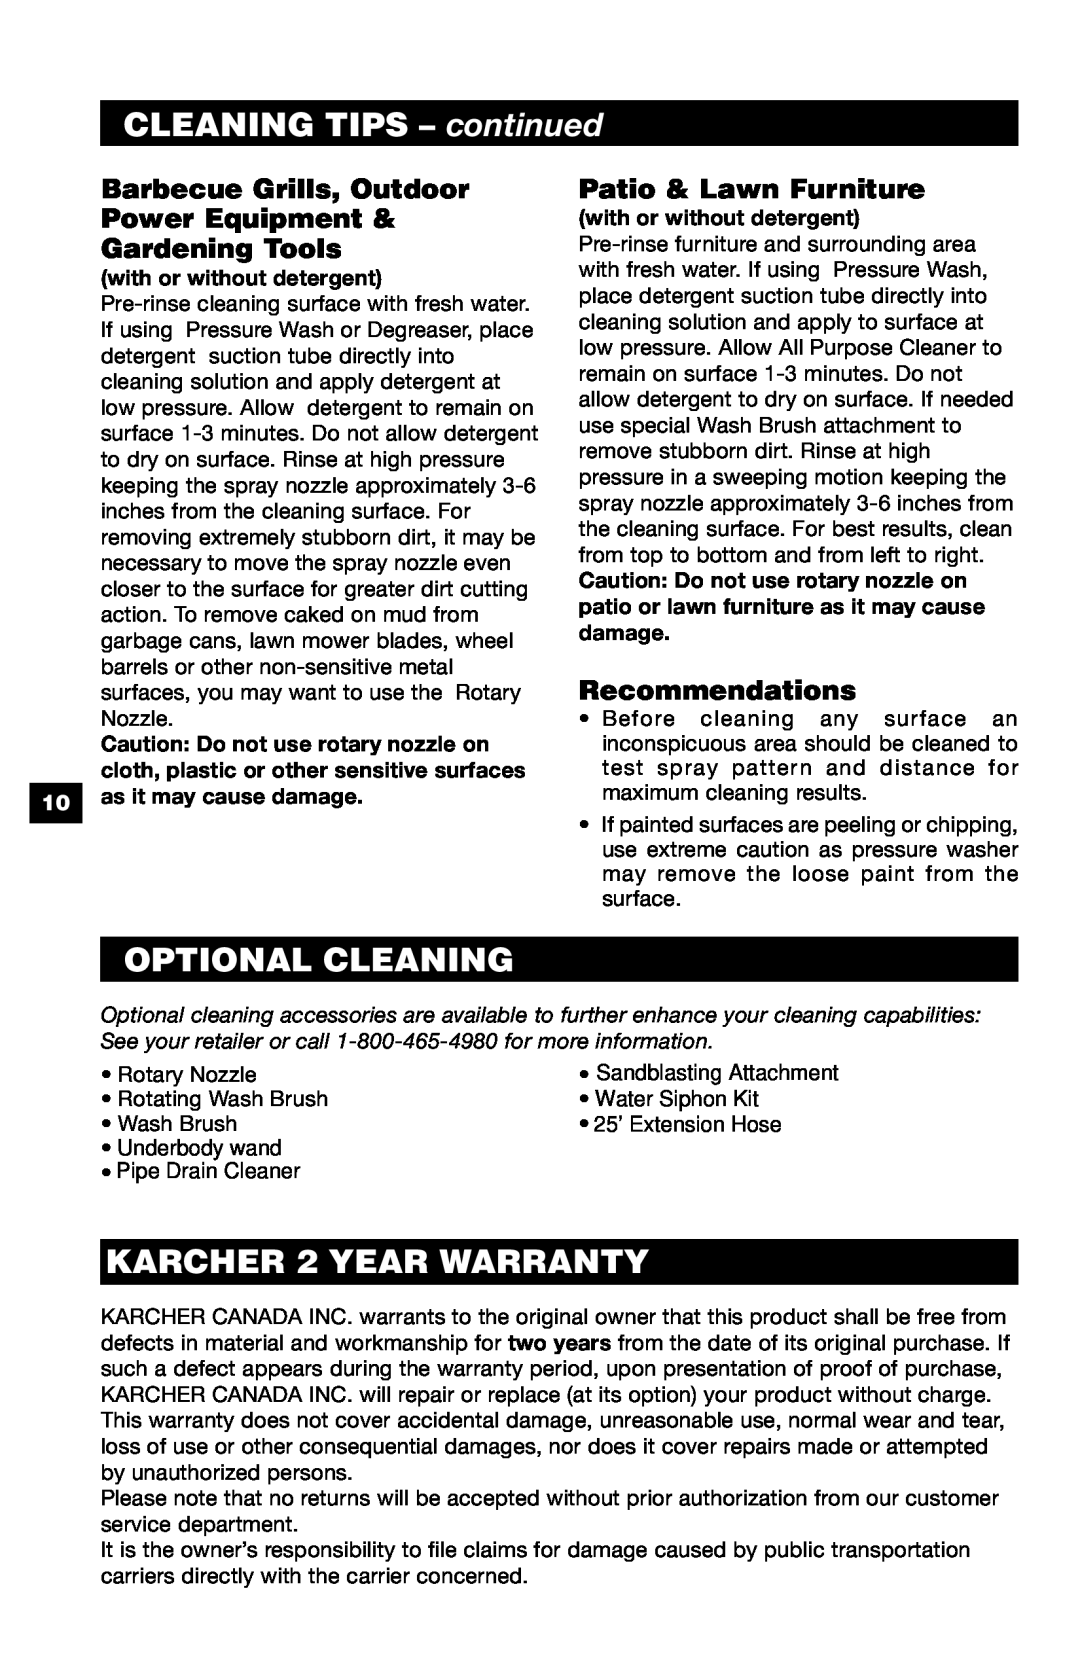 Karcher K 370 M CLEANING TIPS - continued, Optional Cleaning, KARCHER 2 YEAR WARRANTY, Gardening Tools, Recommendations 